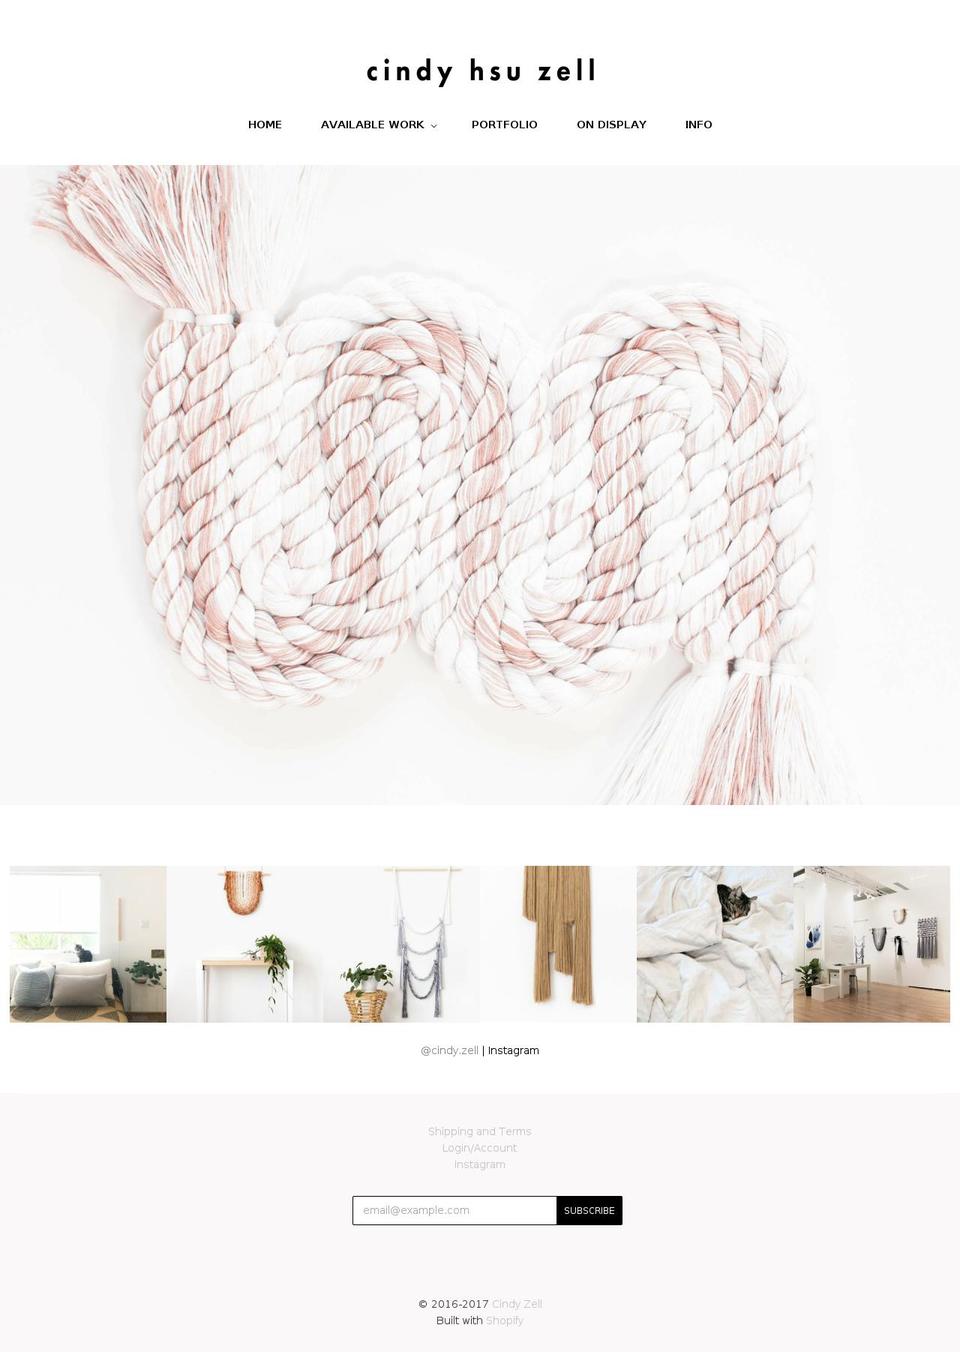 Baseline Shopify theme site example cindyzell.com